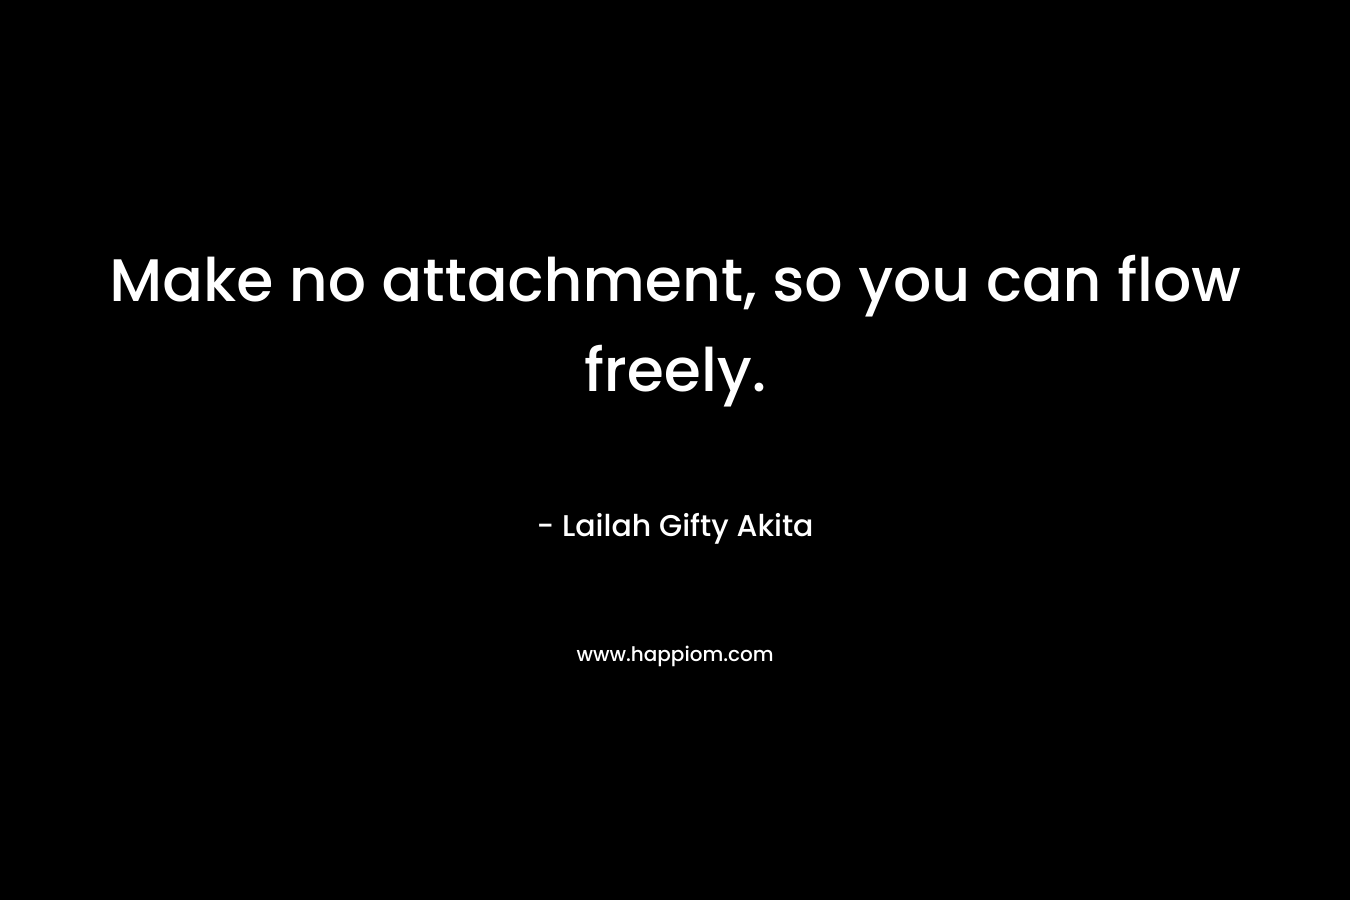 Make no attachment, so you can flow freely.